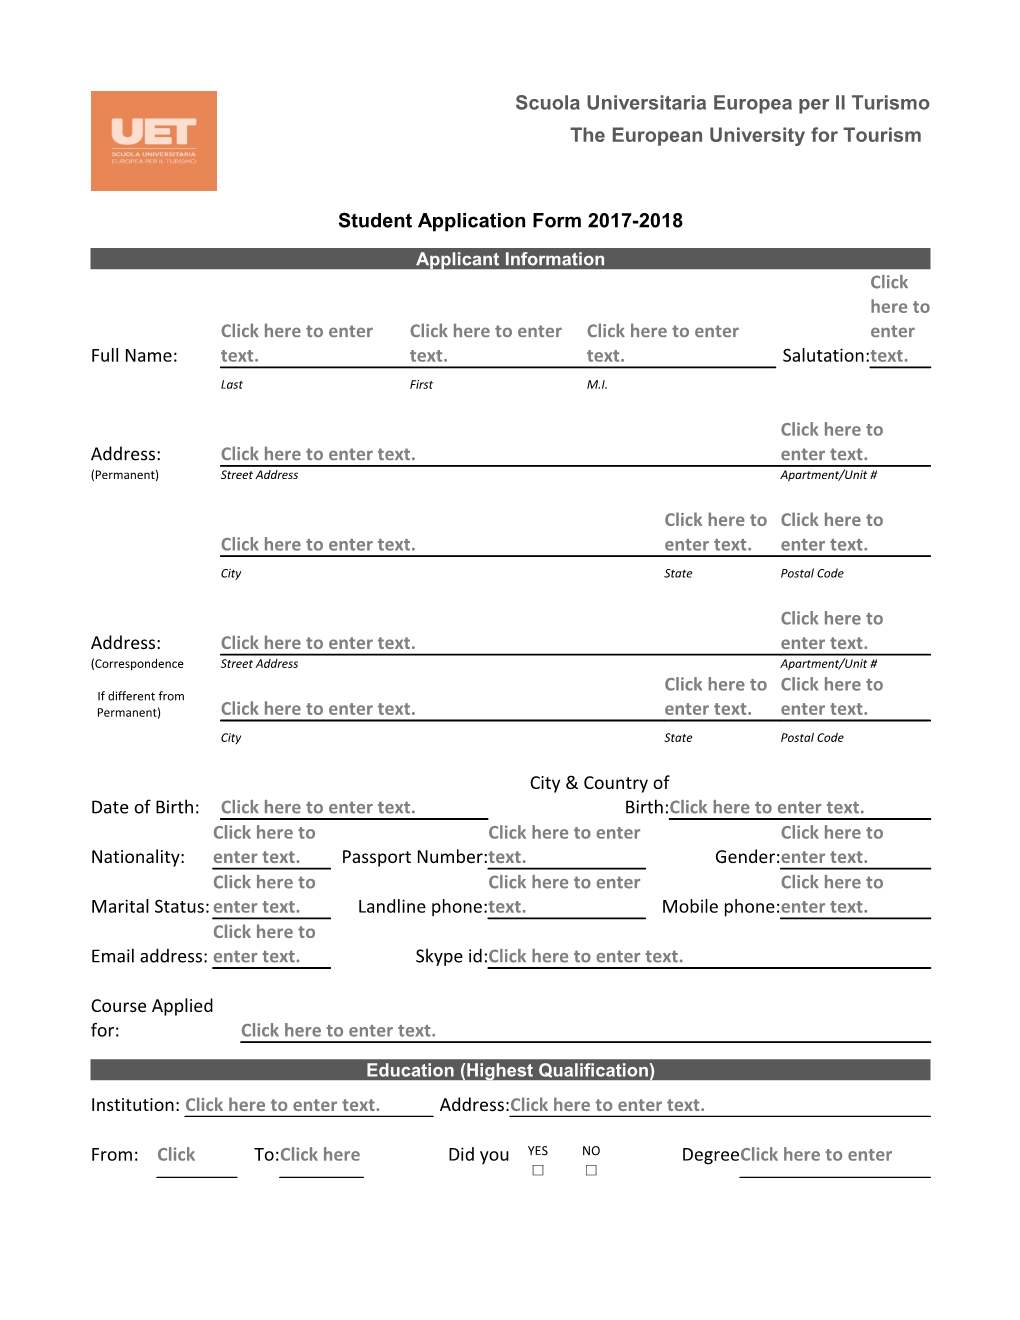 Student Application Form 2017-2018